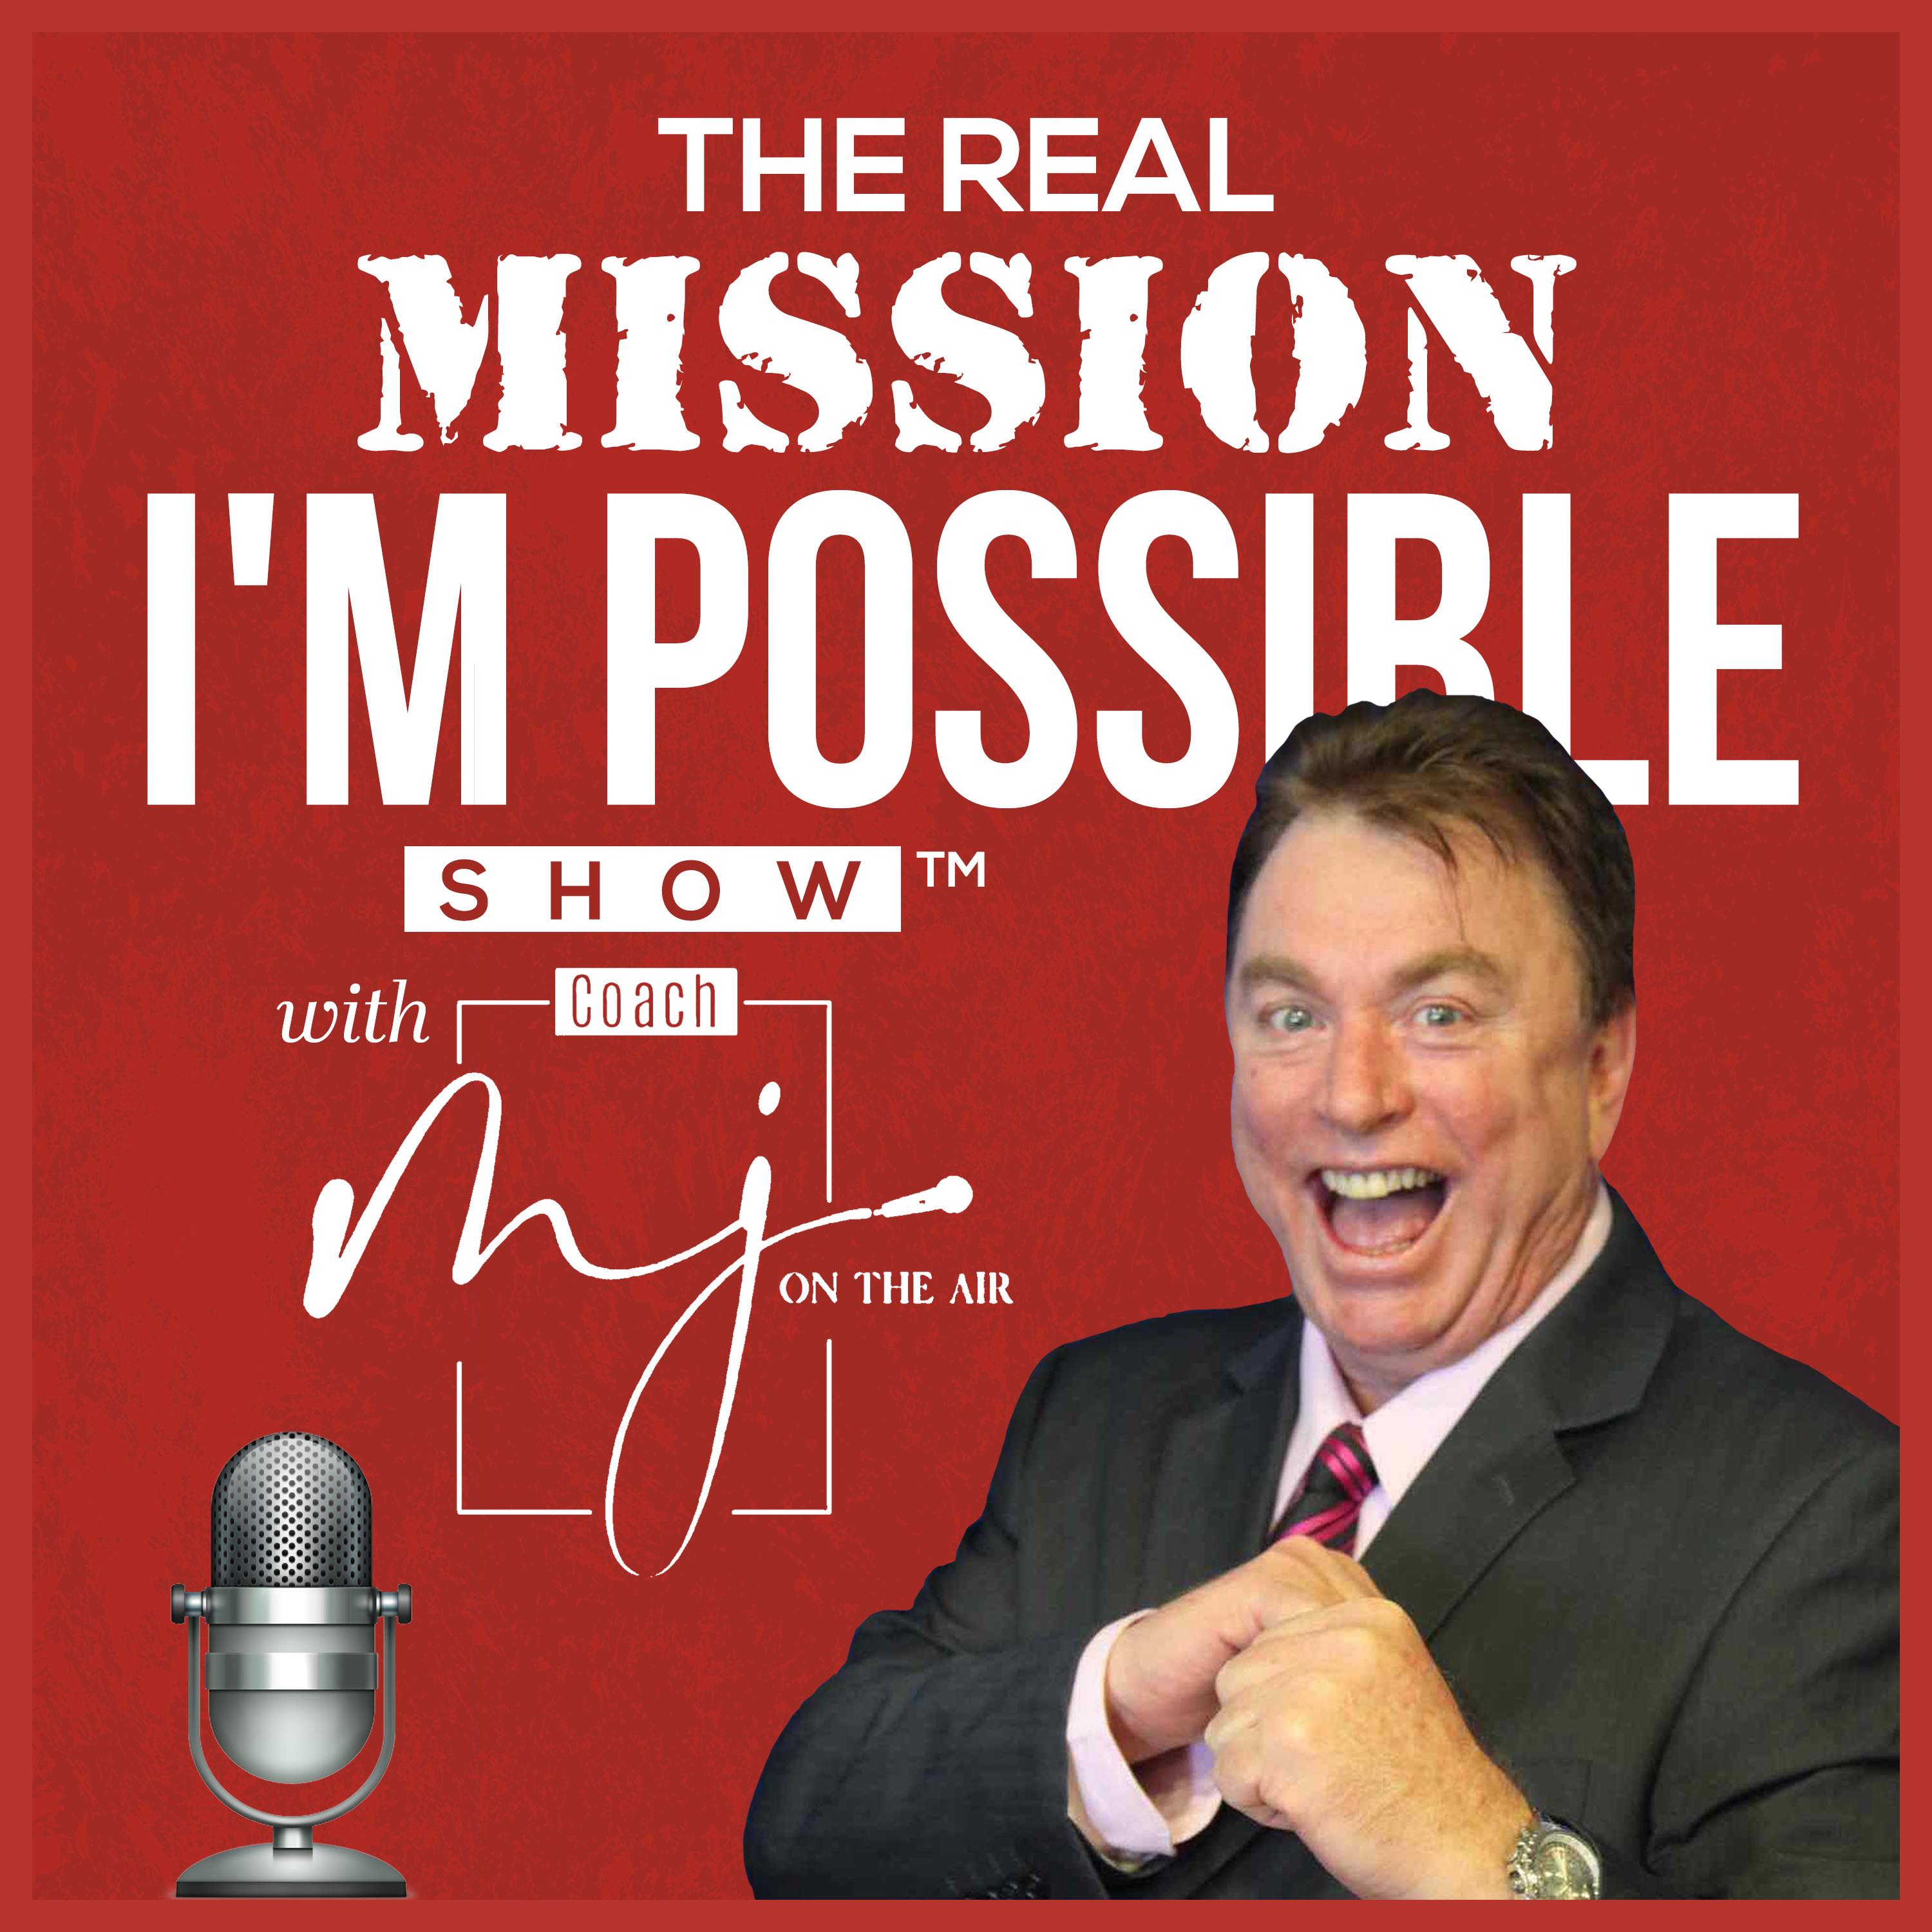 The Real Mission I’M Possible Show with Coach M J